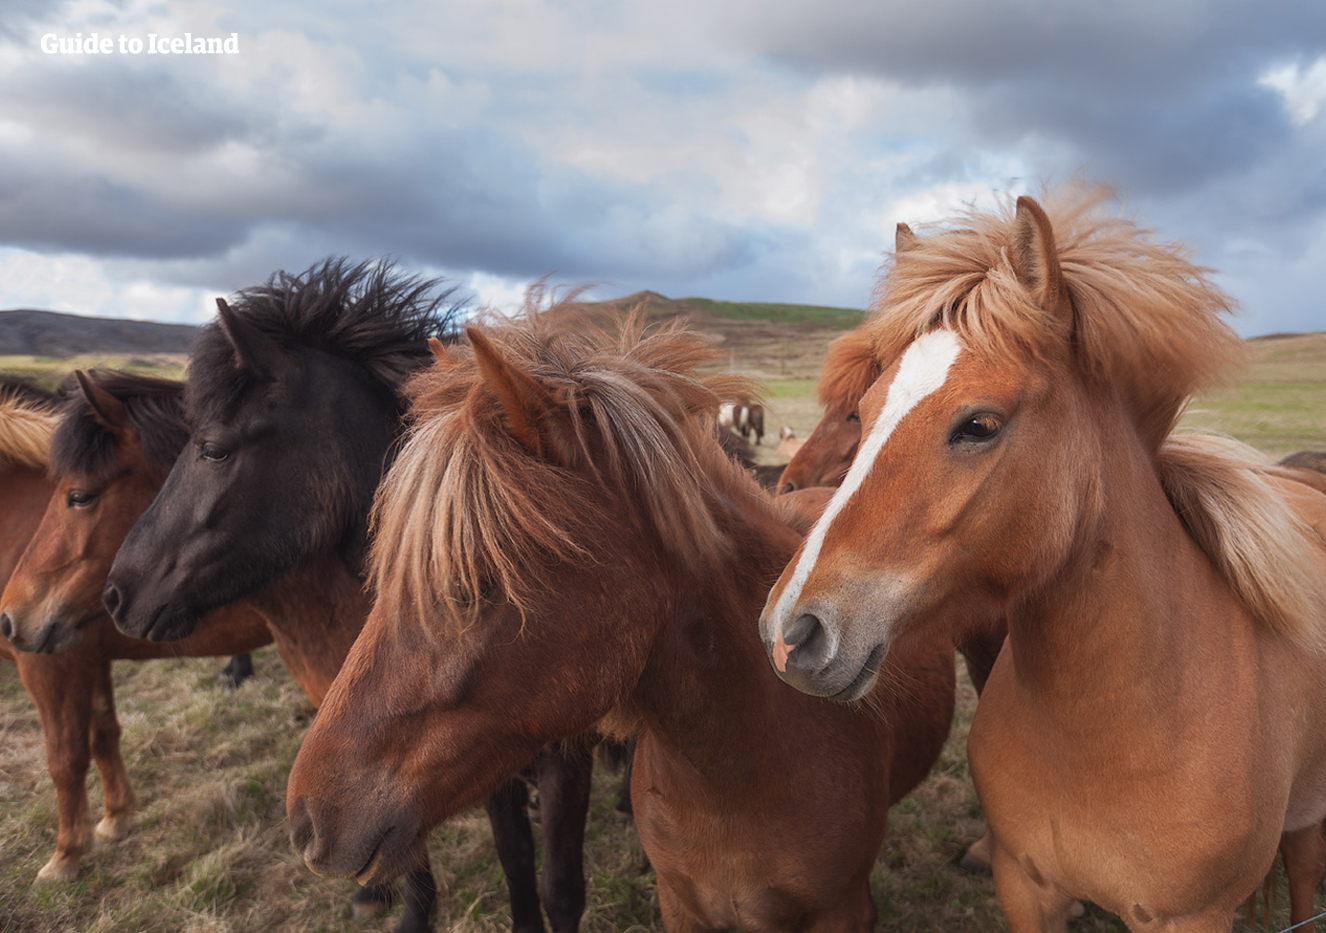 You might spot a few Icelandic horses grazing in the country on your self-drive tour